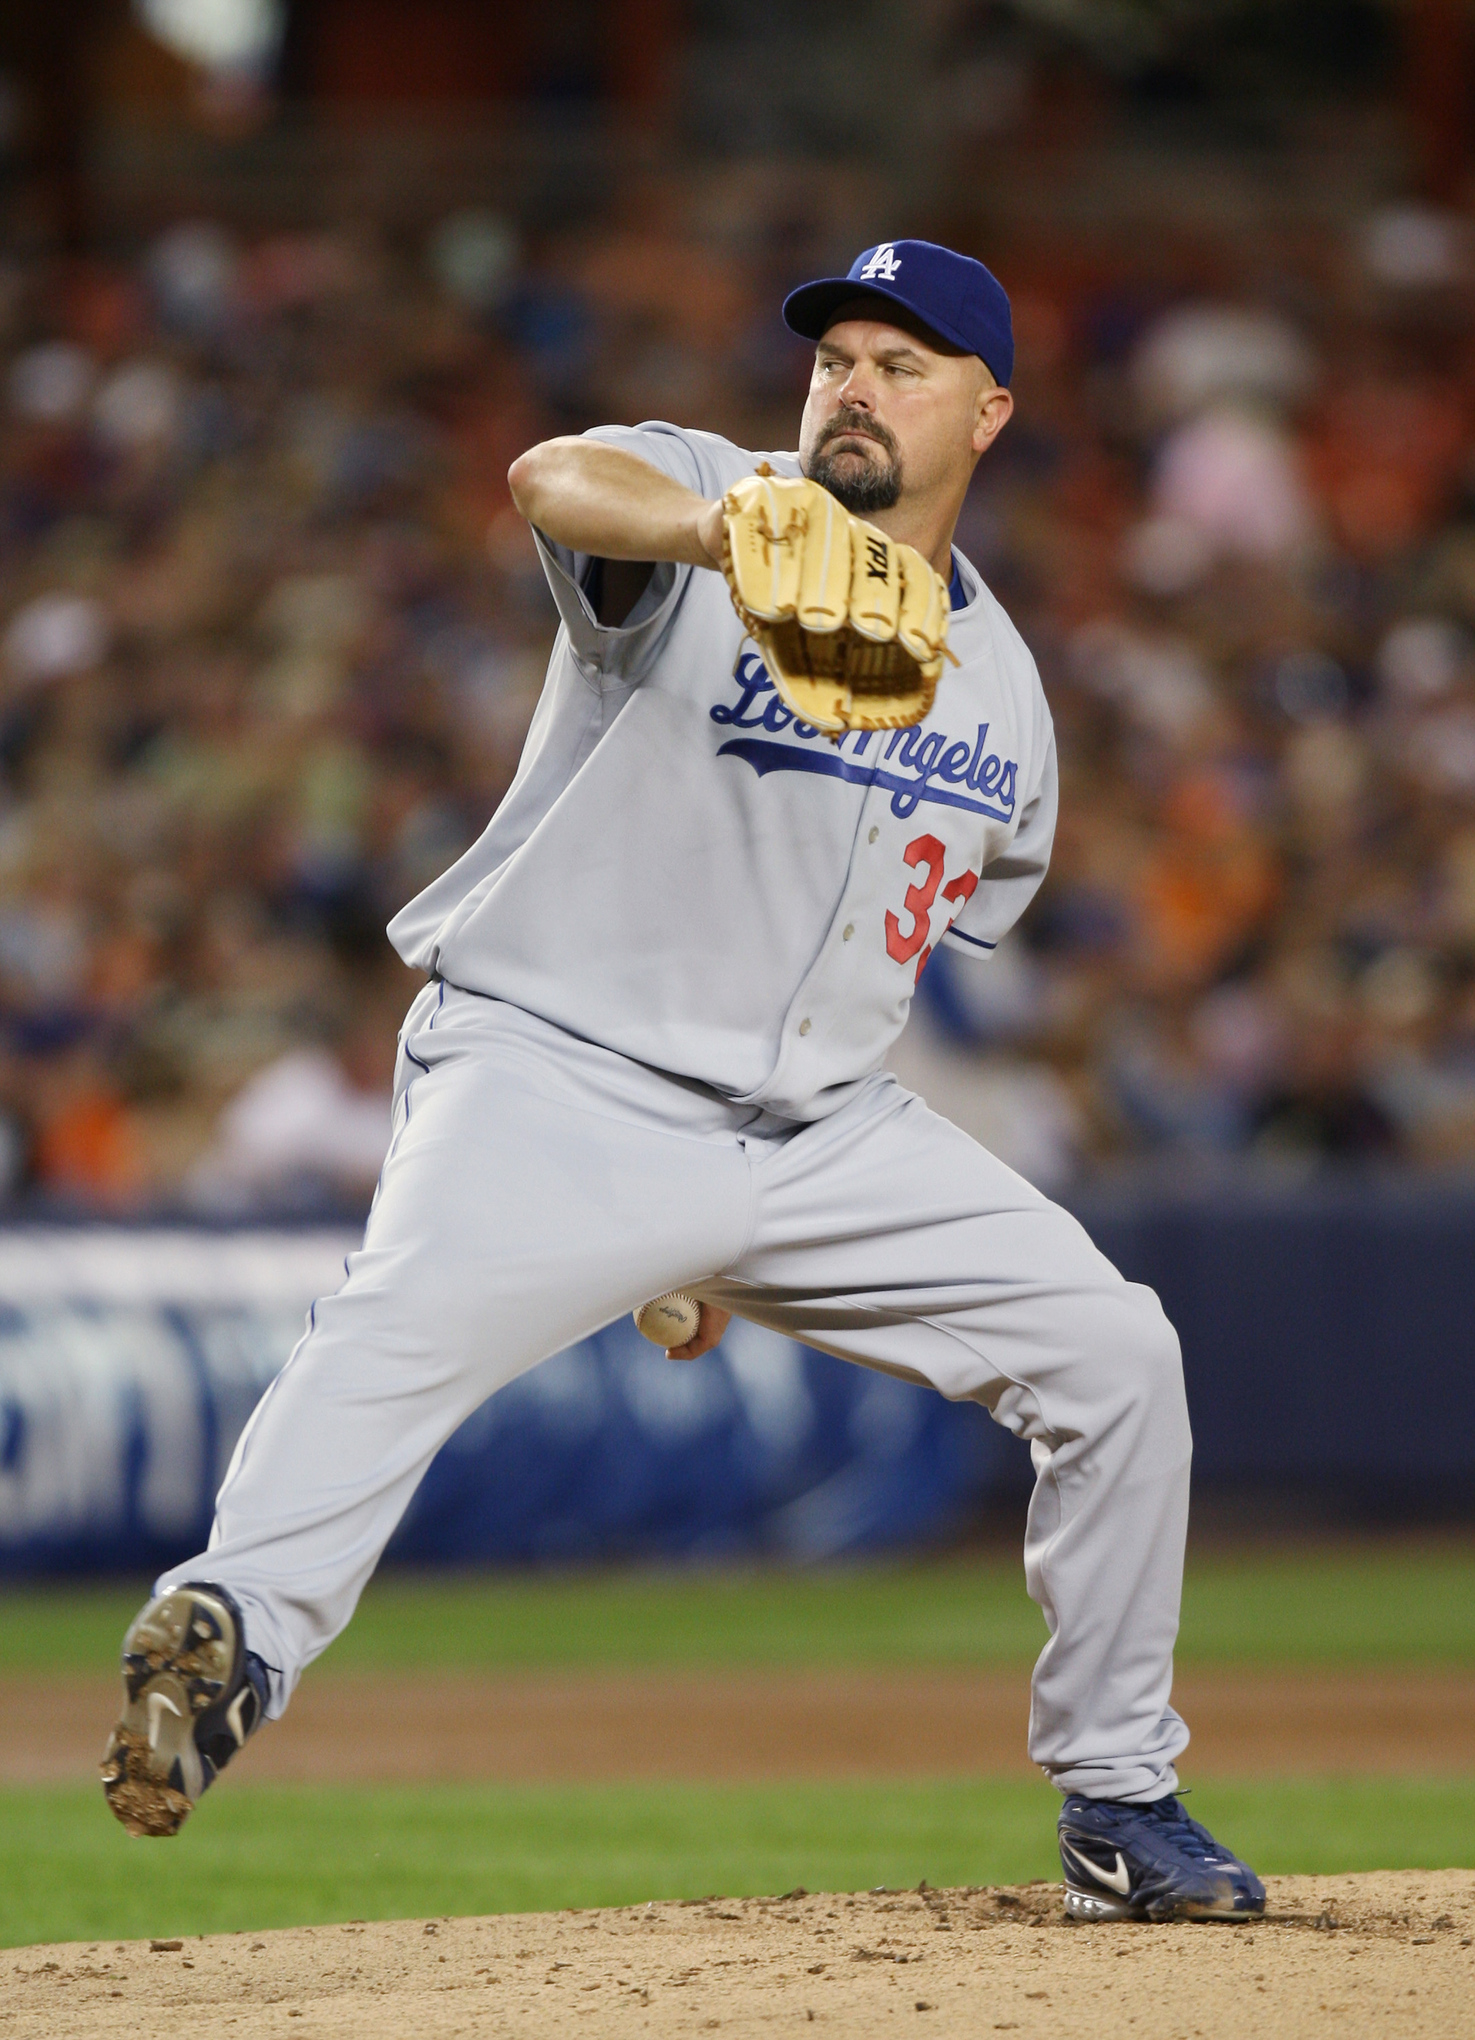 Who remembers David Wells as a Dodger?